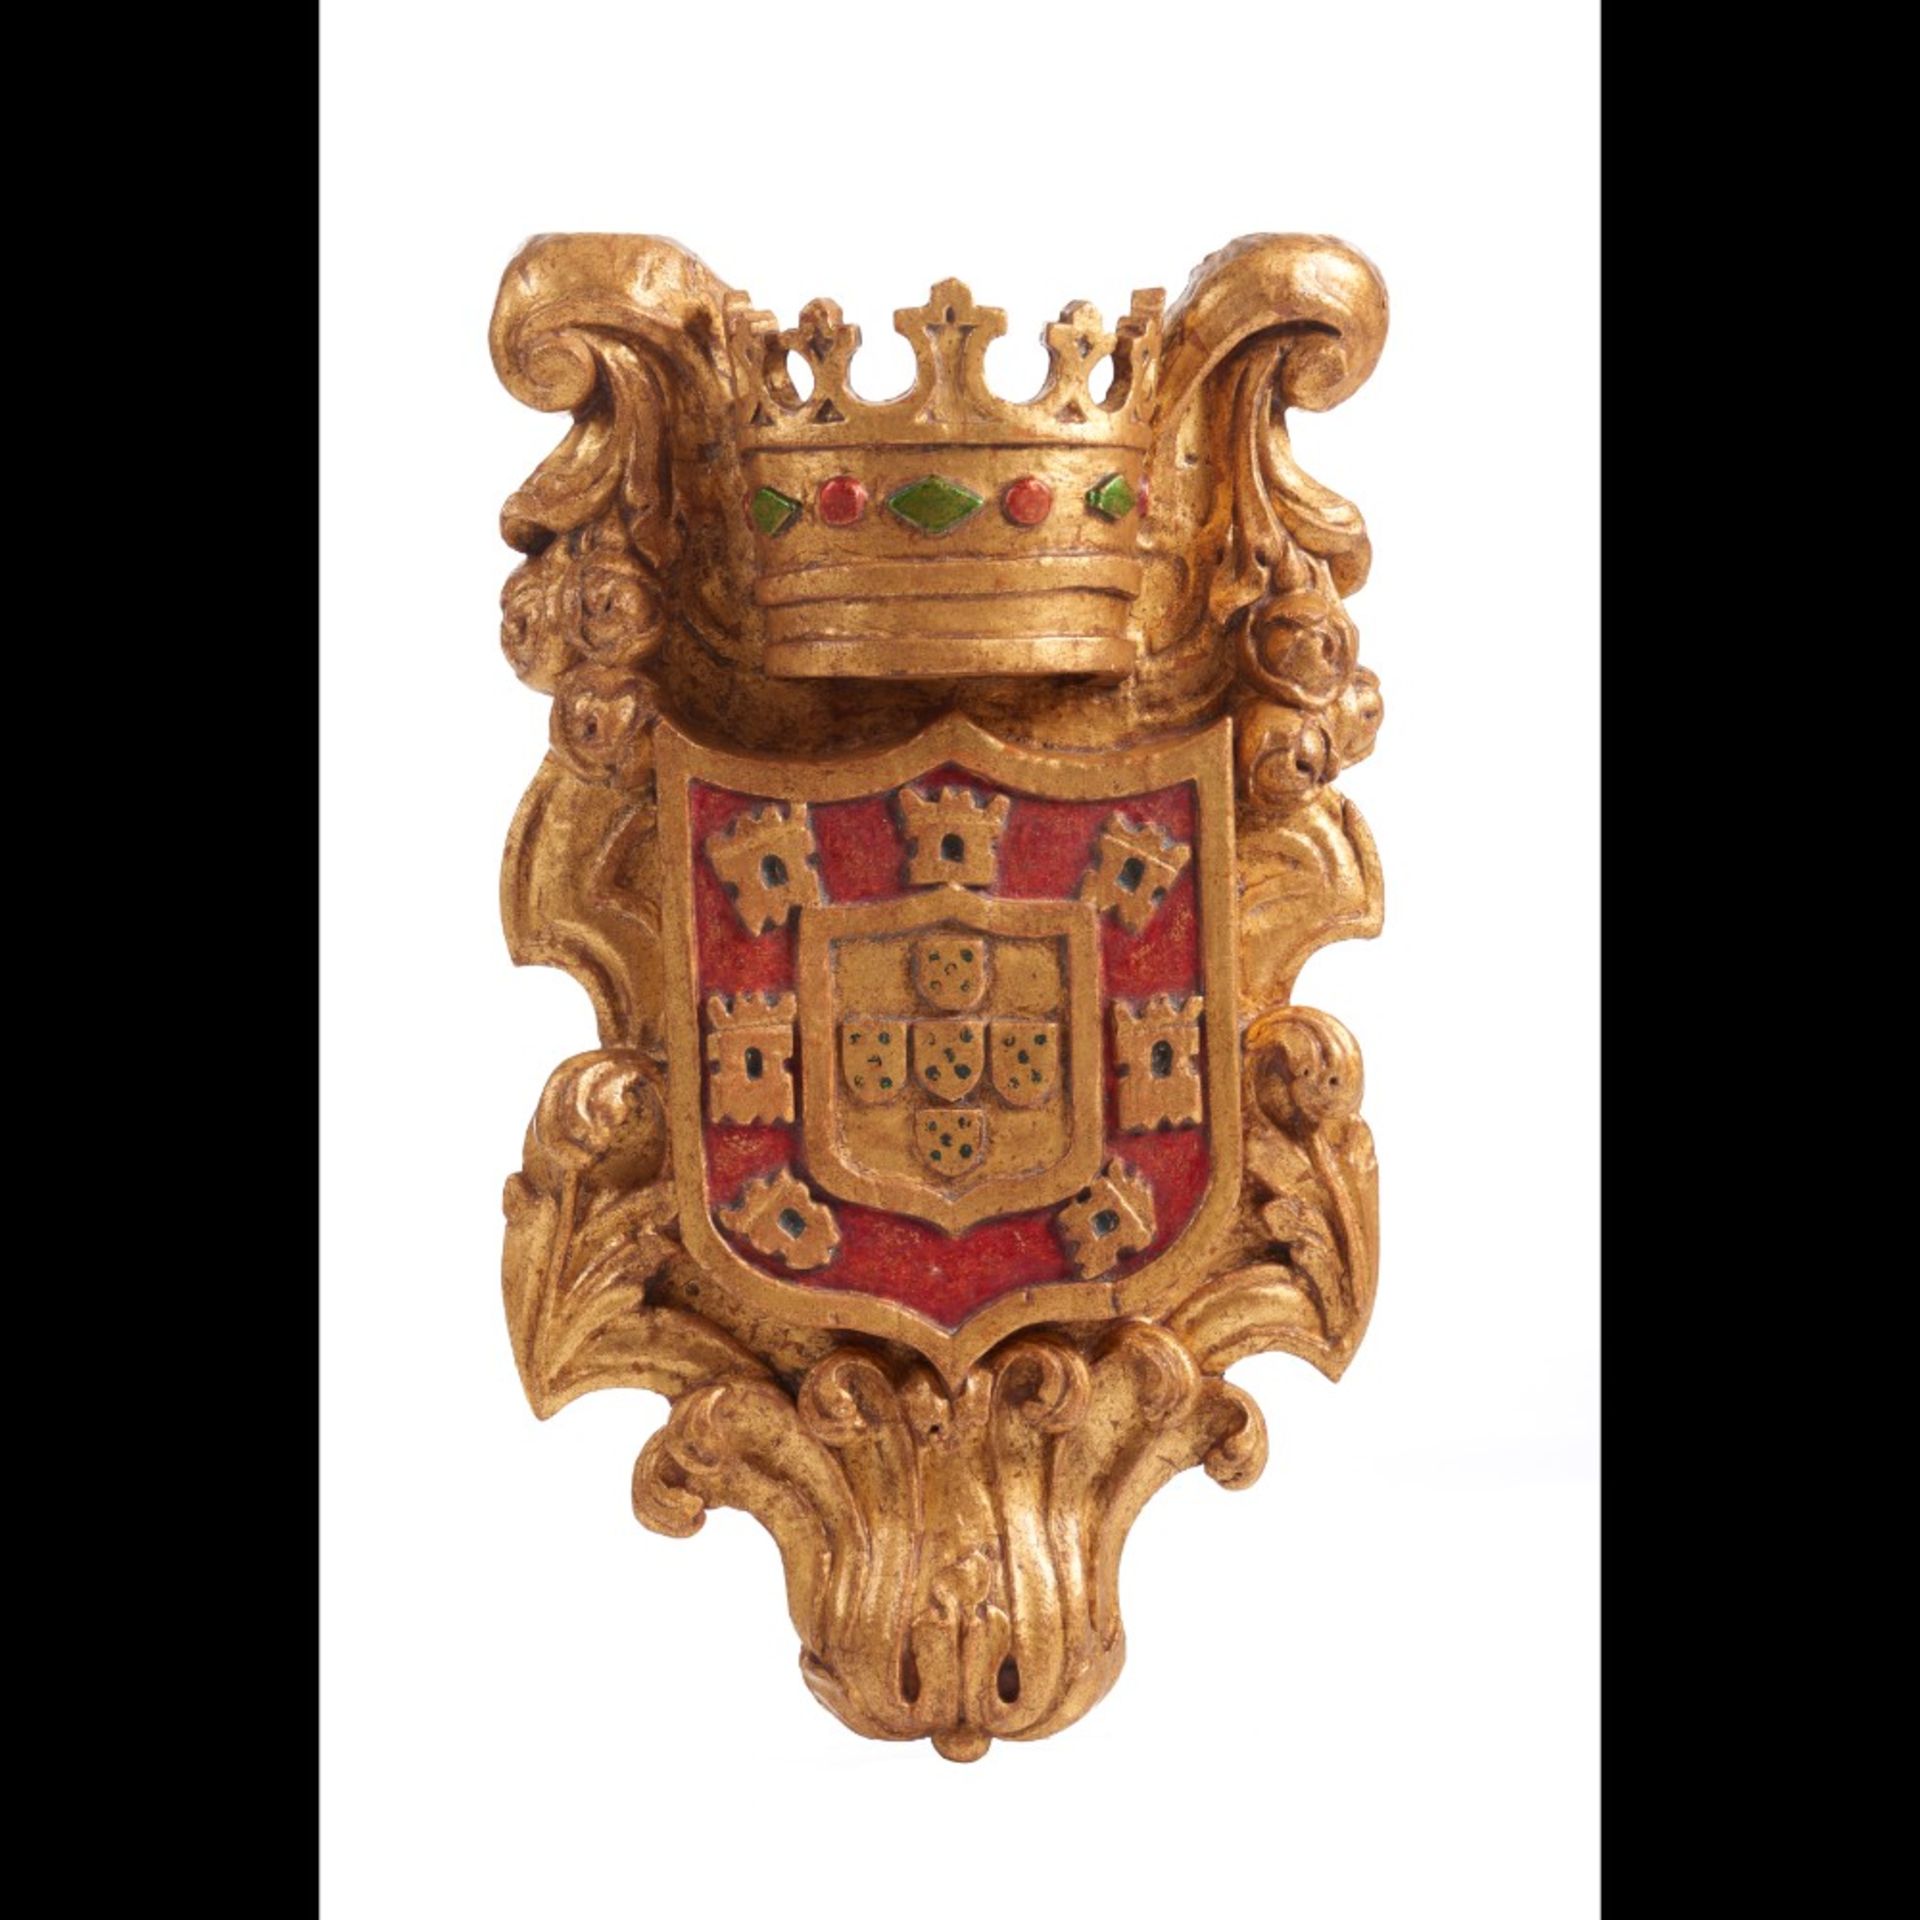  Armorial shield for the Kingdom of Portugal